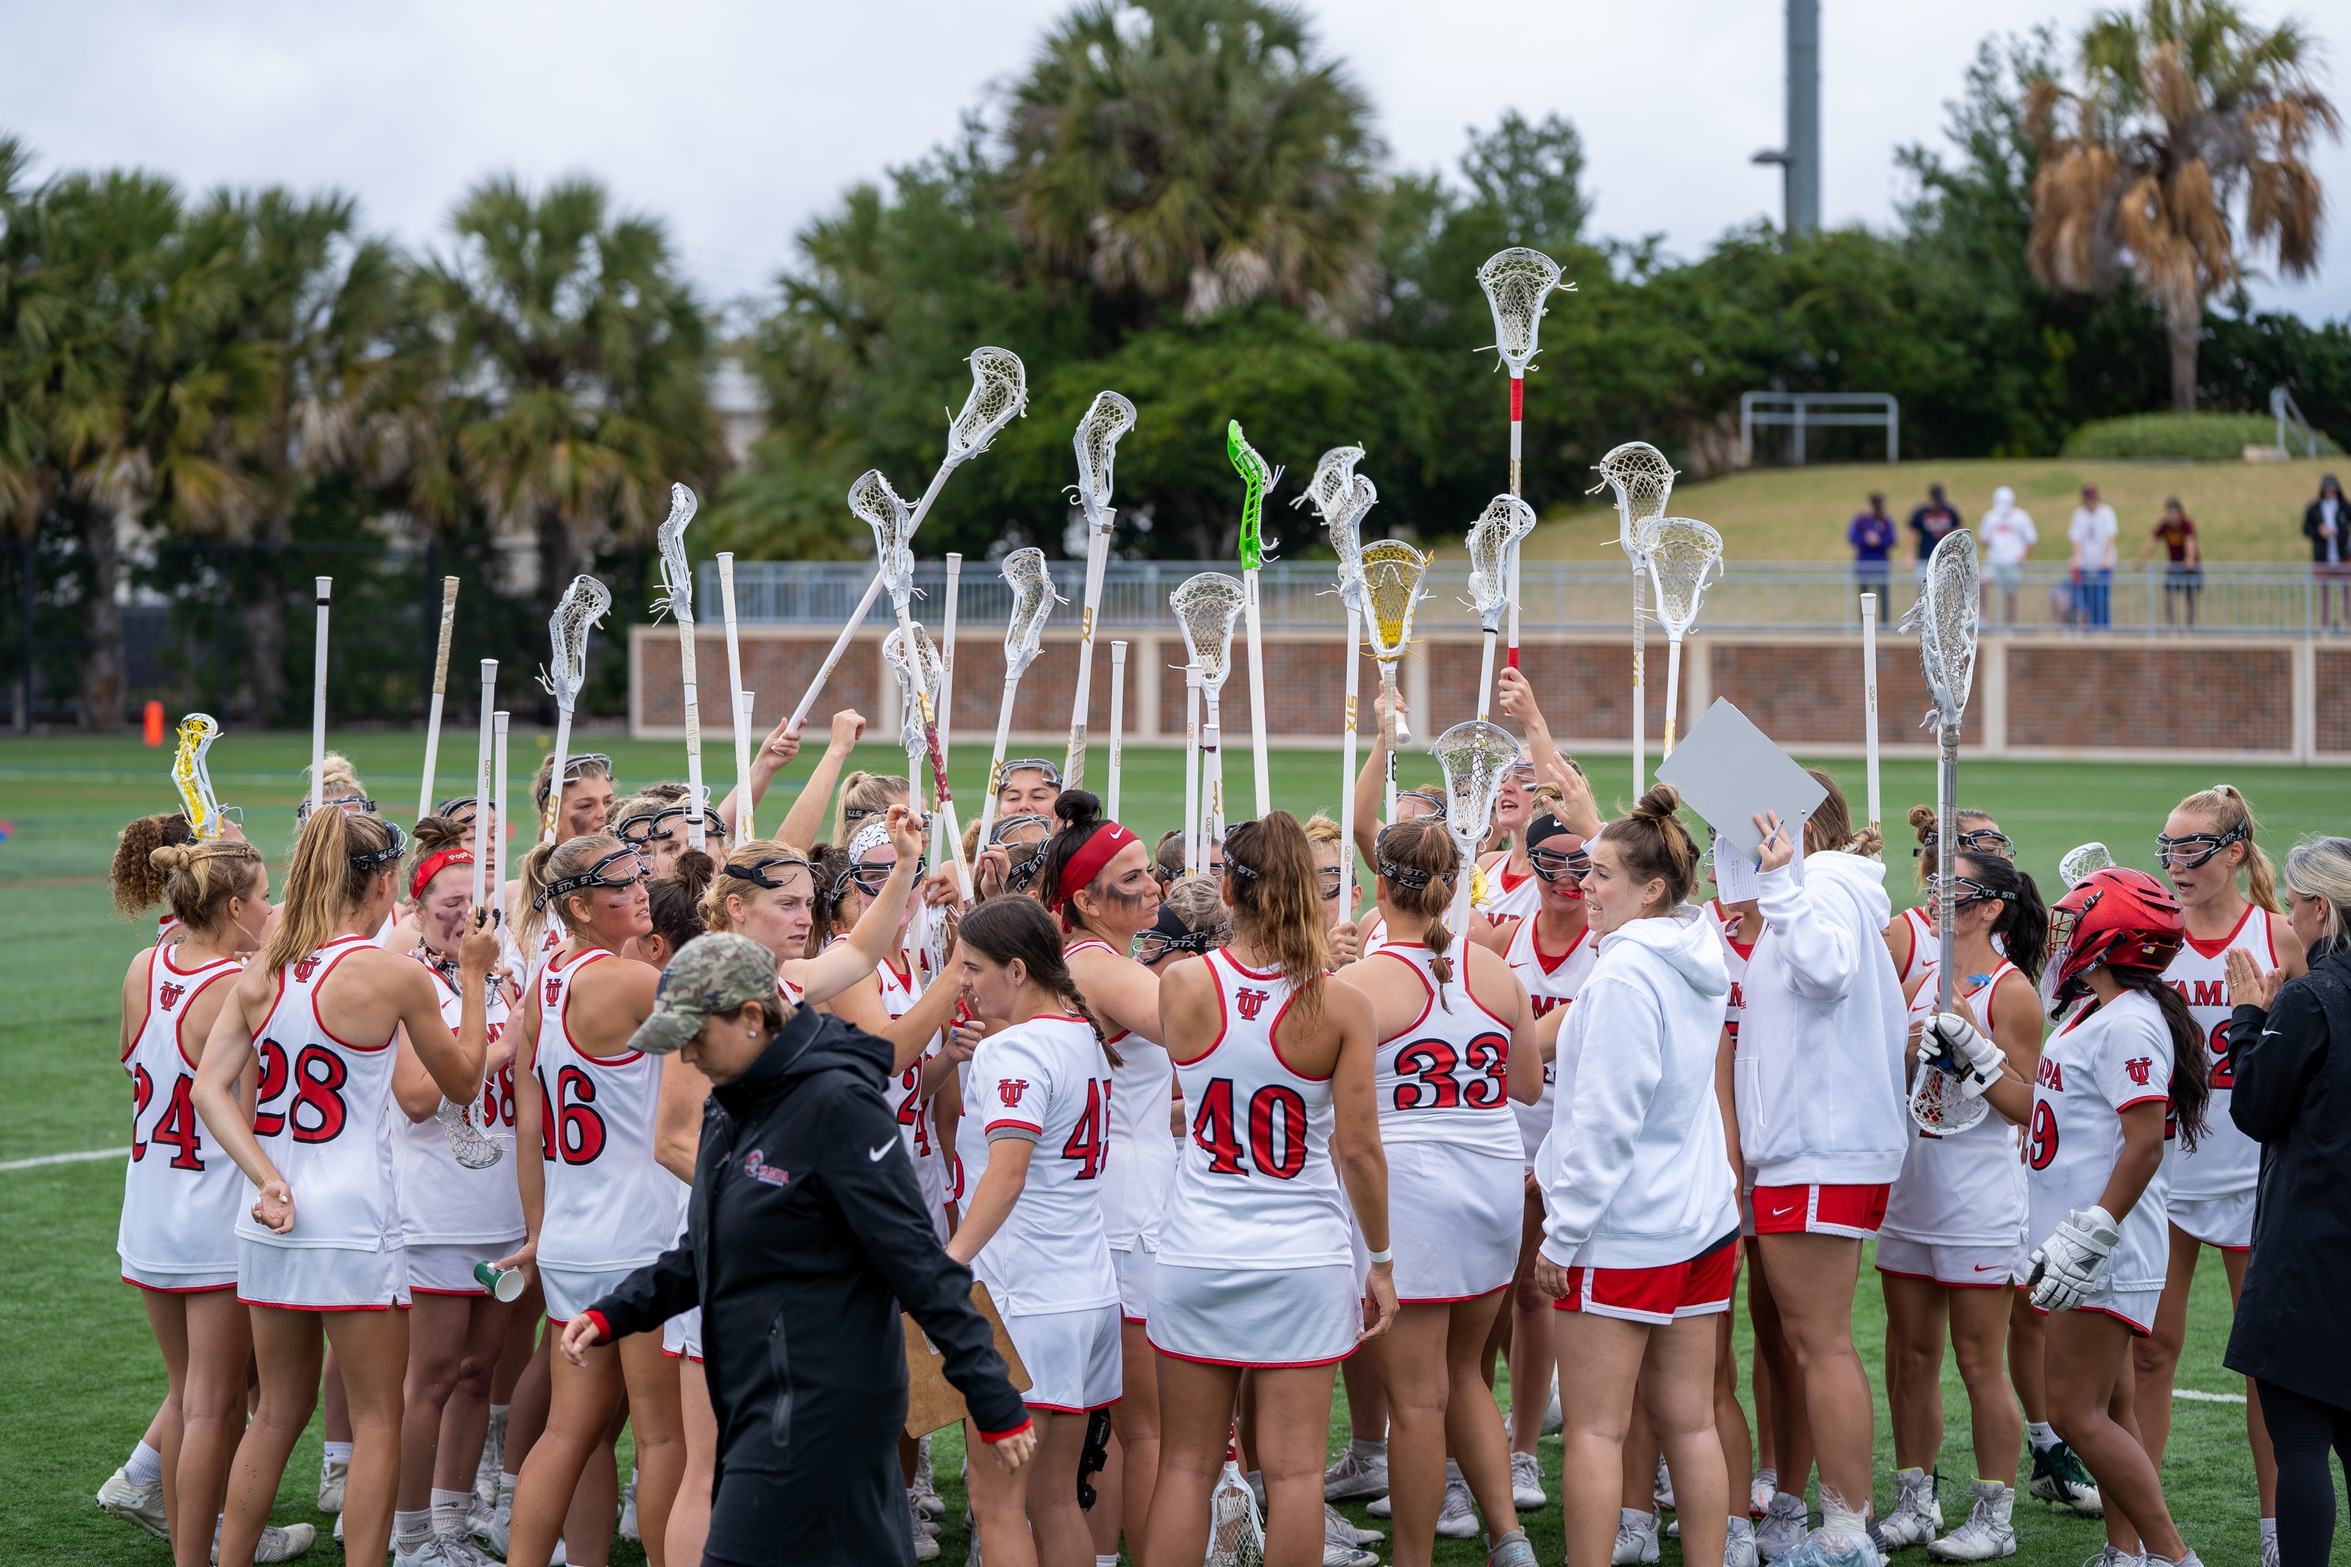 GAMEDAY ADVANCE: Tampa Looks to Defend Home Field as They Take on Grand Valley State